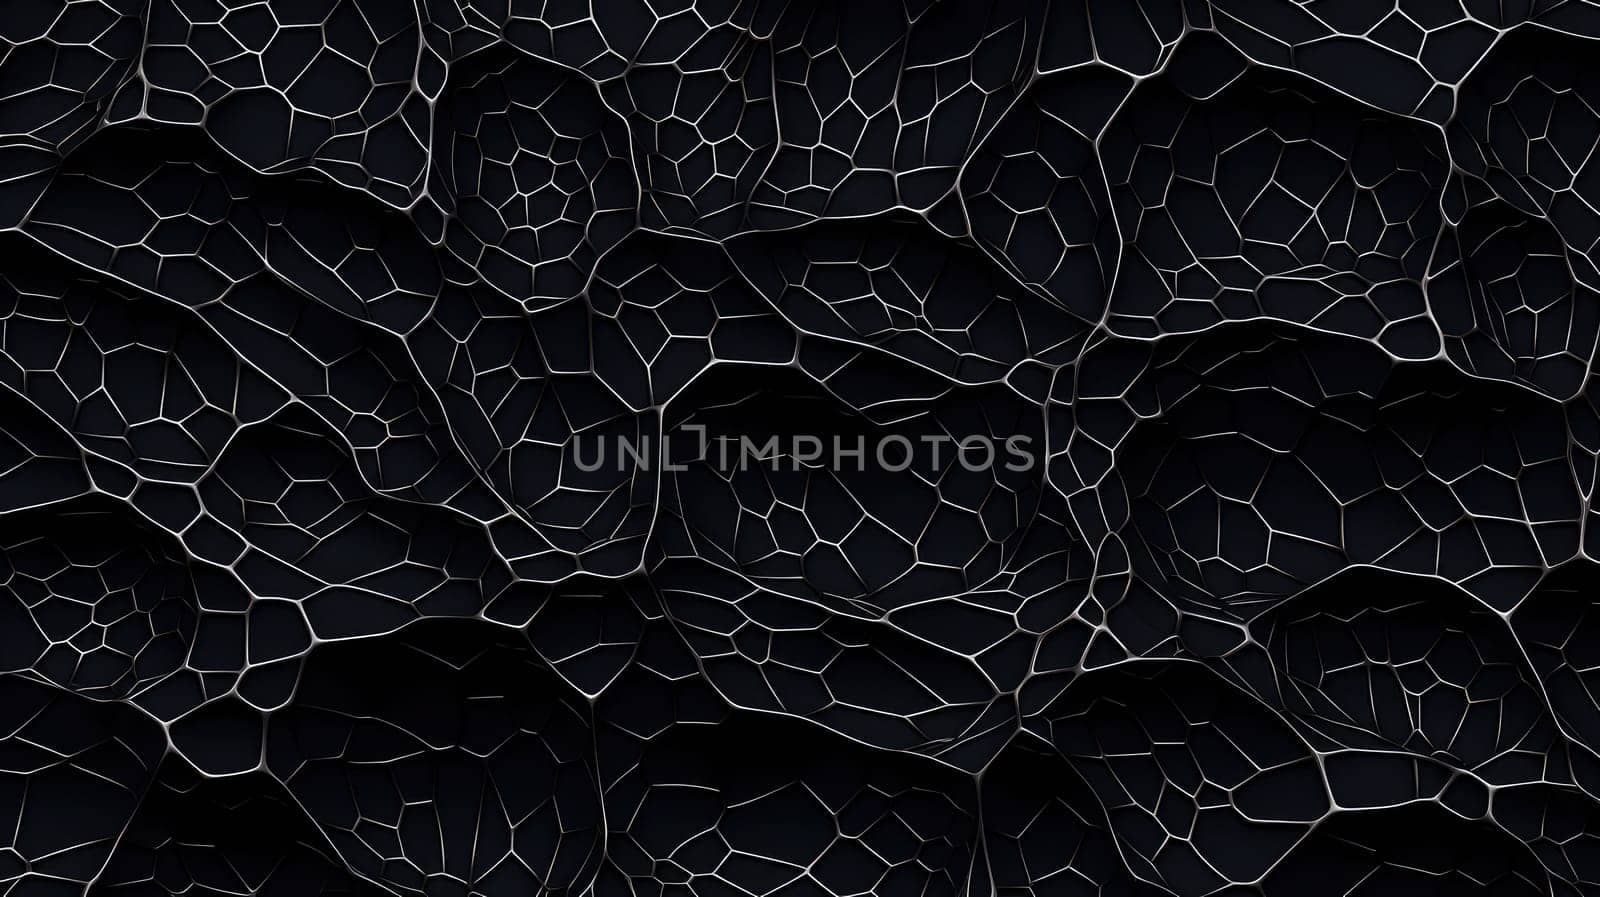 Abstract textured background with neural pattern. Graphic design element. Backdrop template